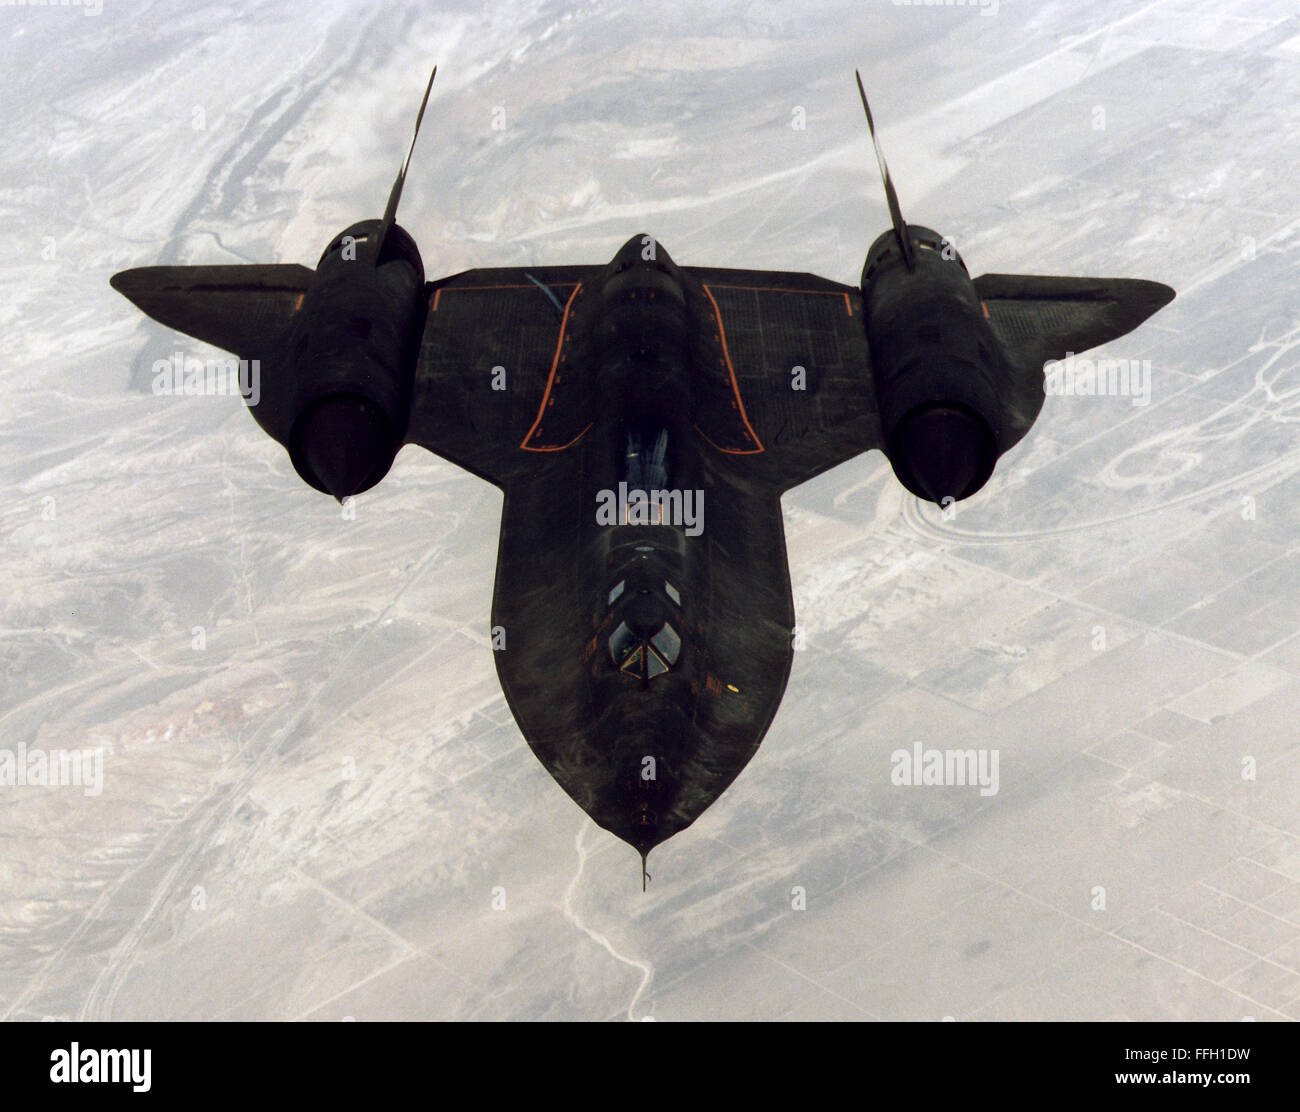 At 80,000 feet, the SR-71 was capable of surveying 100,000 square miles of Earth’s surface per hour. In mid-1976, an SR-71 set two world records for its class, with a speed record of about 2,193 mph and an altitude record of sustained flight at about 85,069 feet. Stock Photo